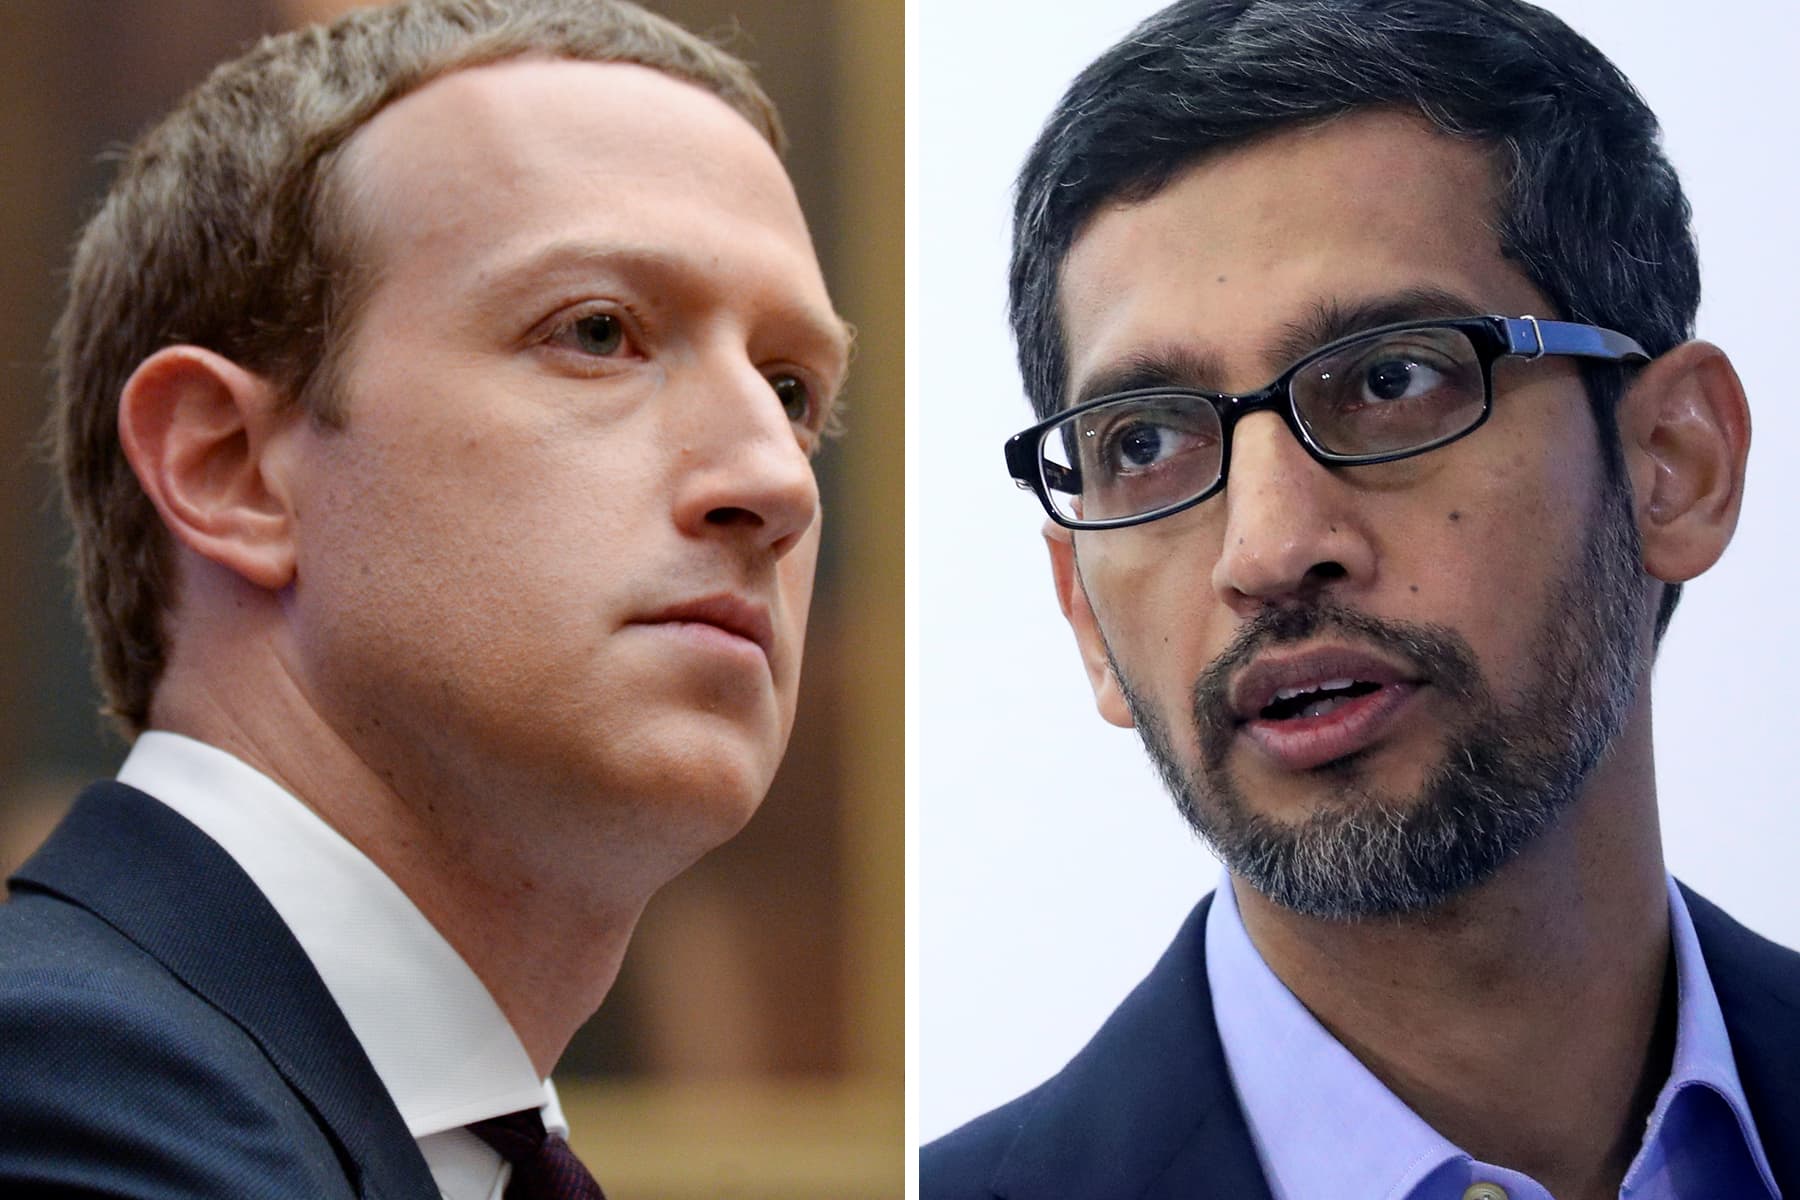 Google, Facebook CEOs oversaw illegal ad auction deal that gave Facebook an advantage, states allege